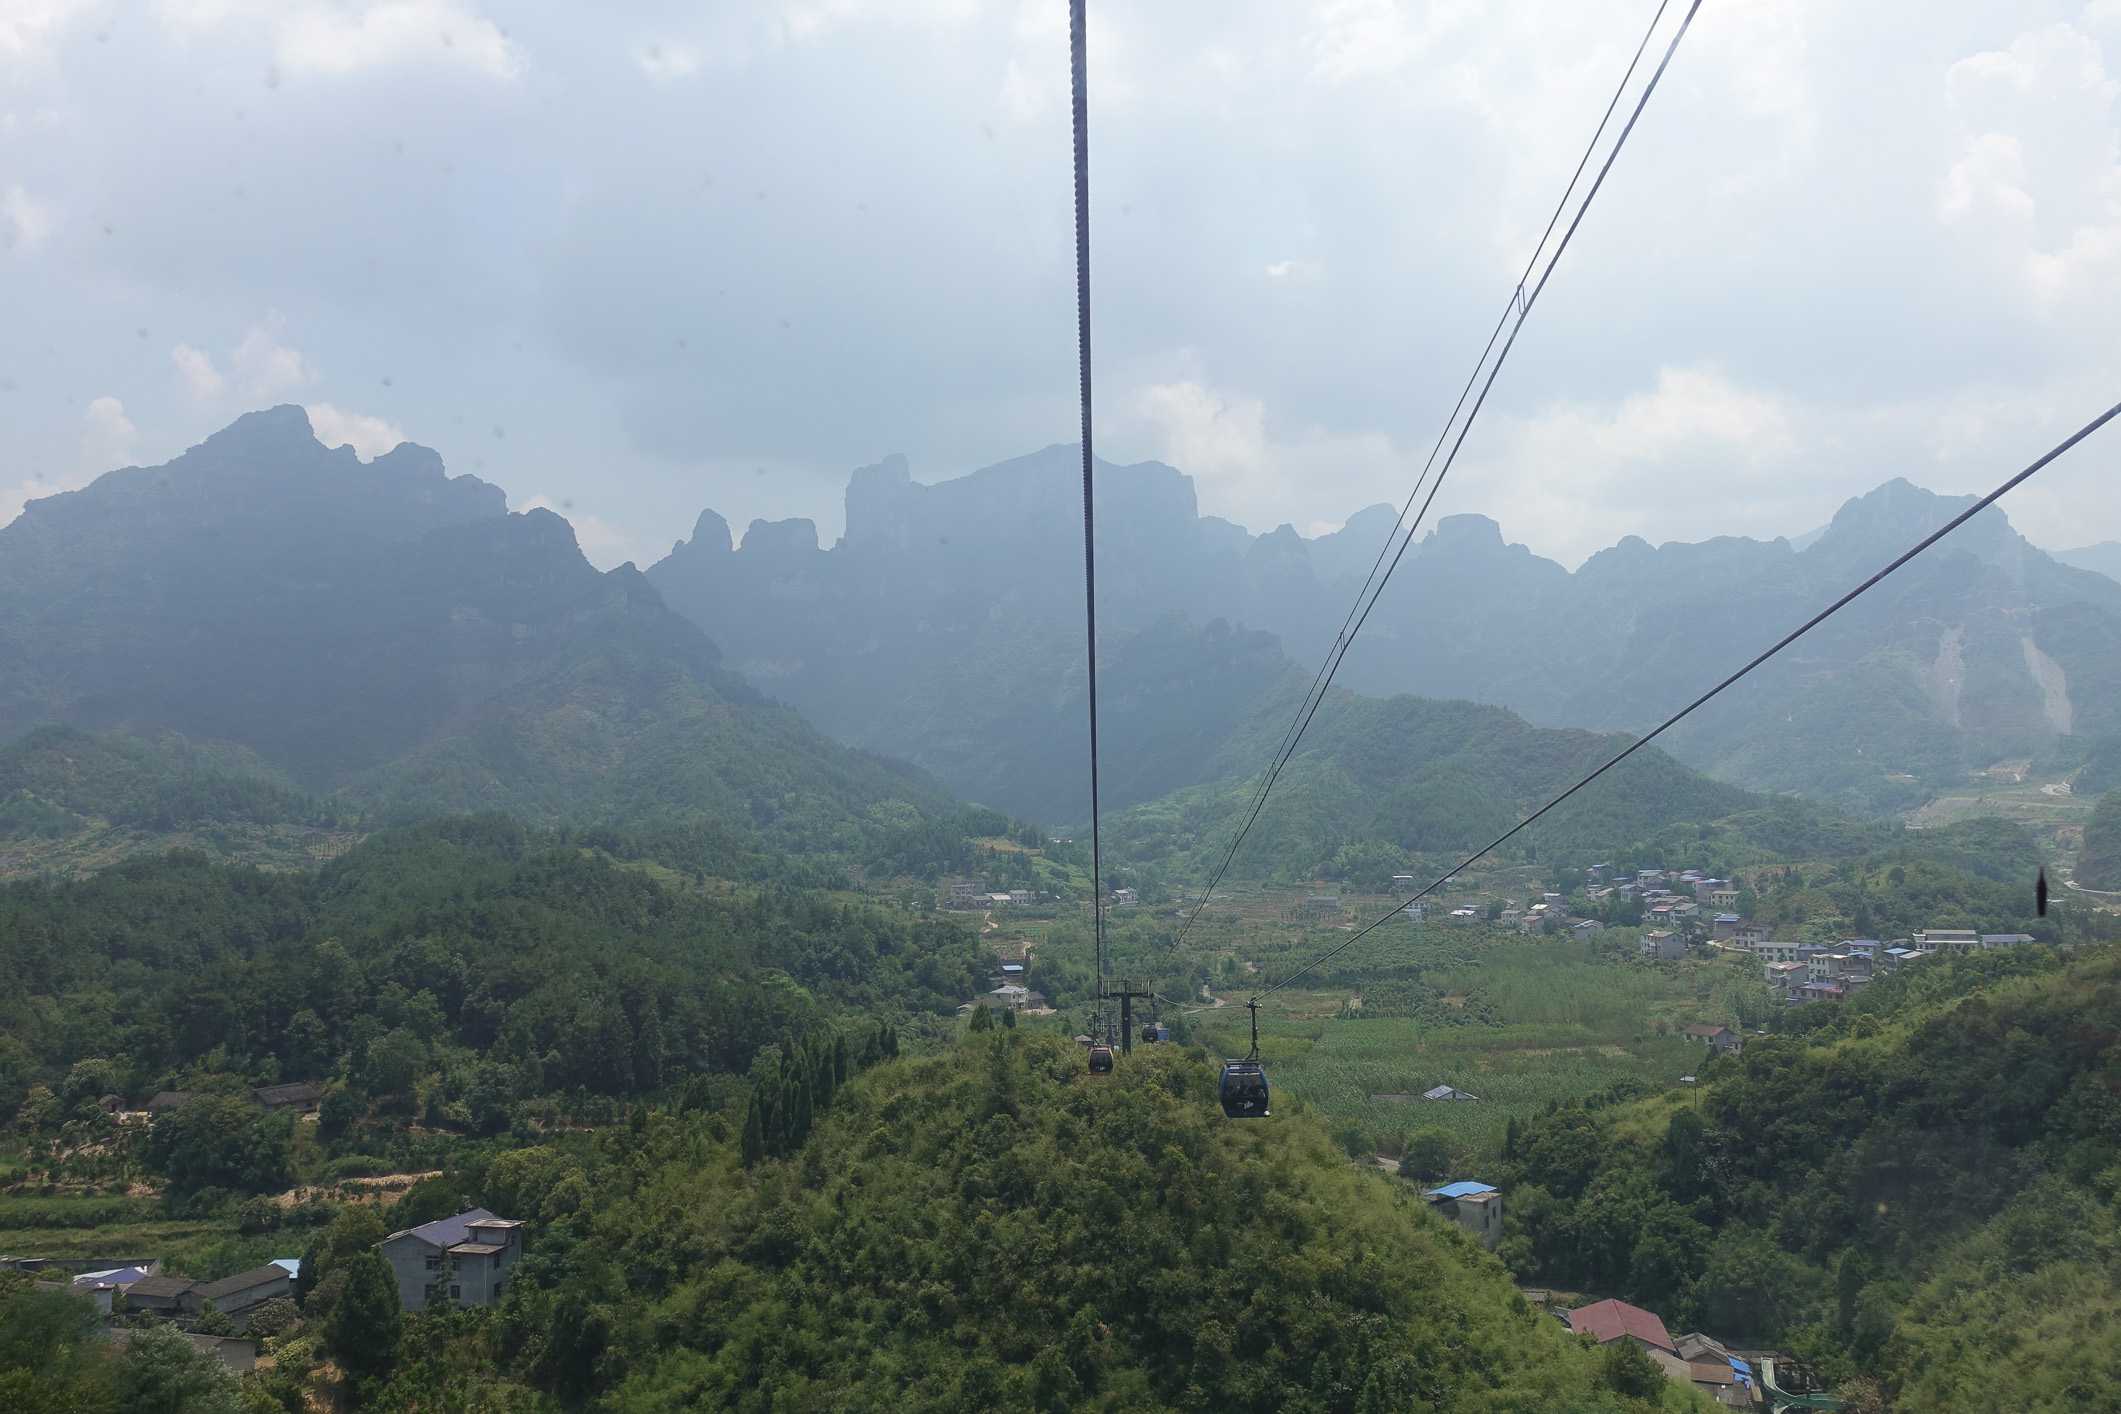 Cable car up to Tianmen Mountain